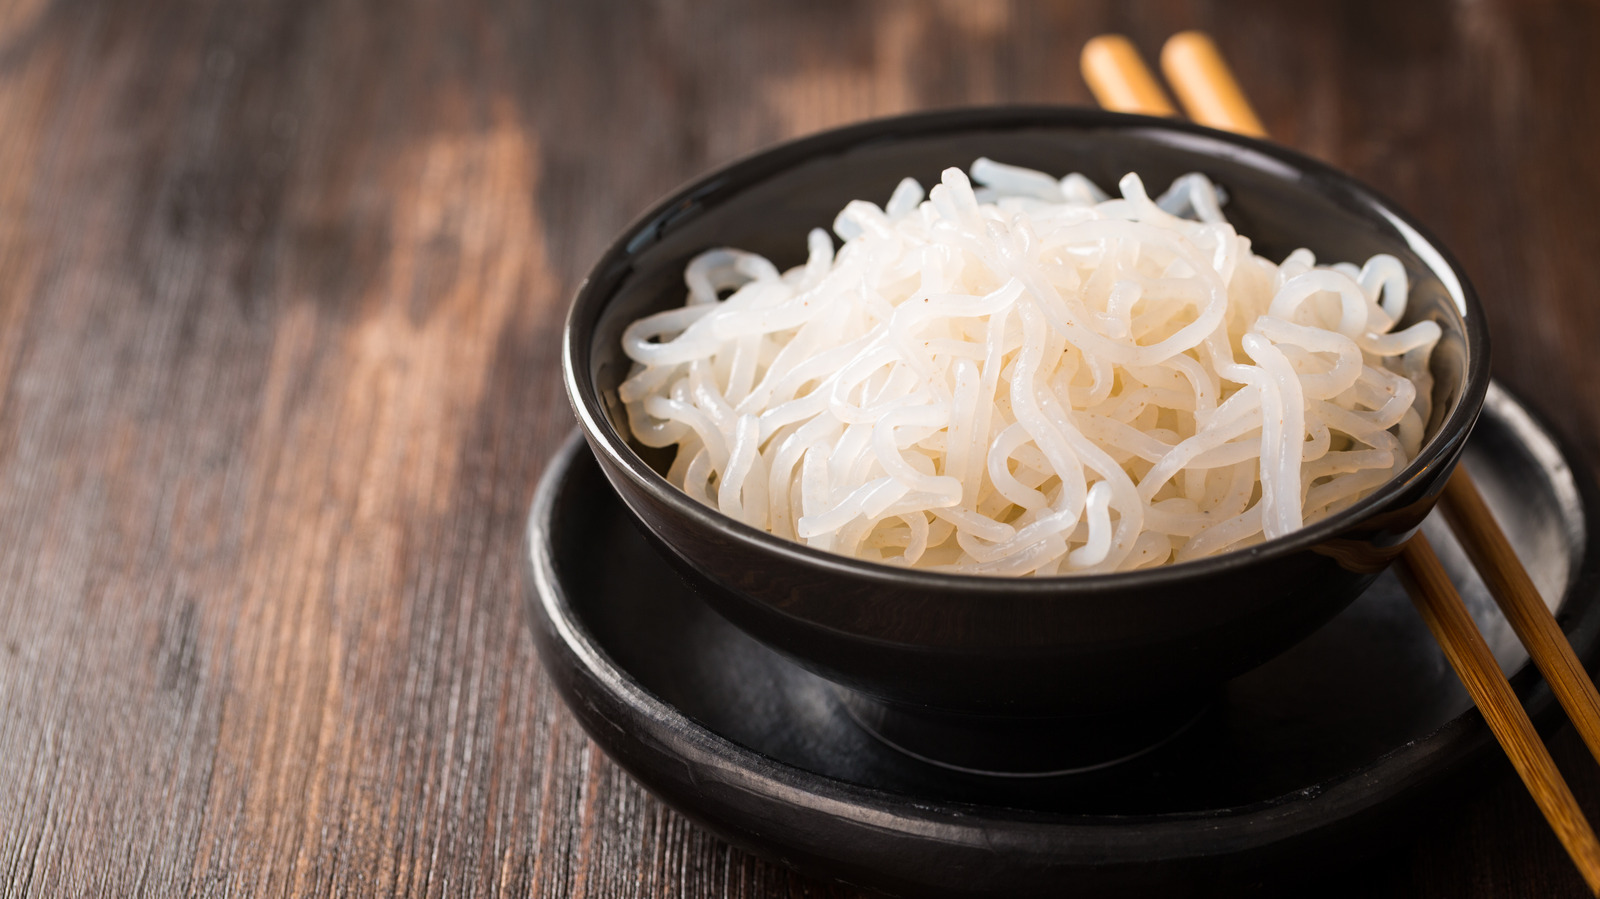 Shirataki: The Japanese Noodles You Should Know About